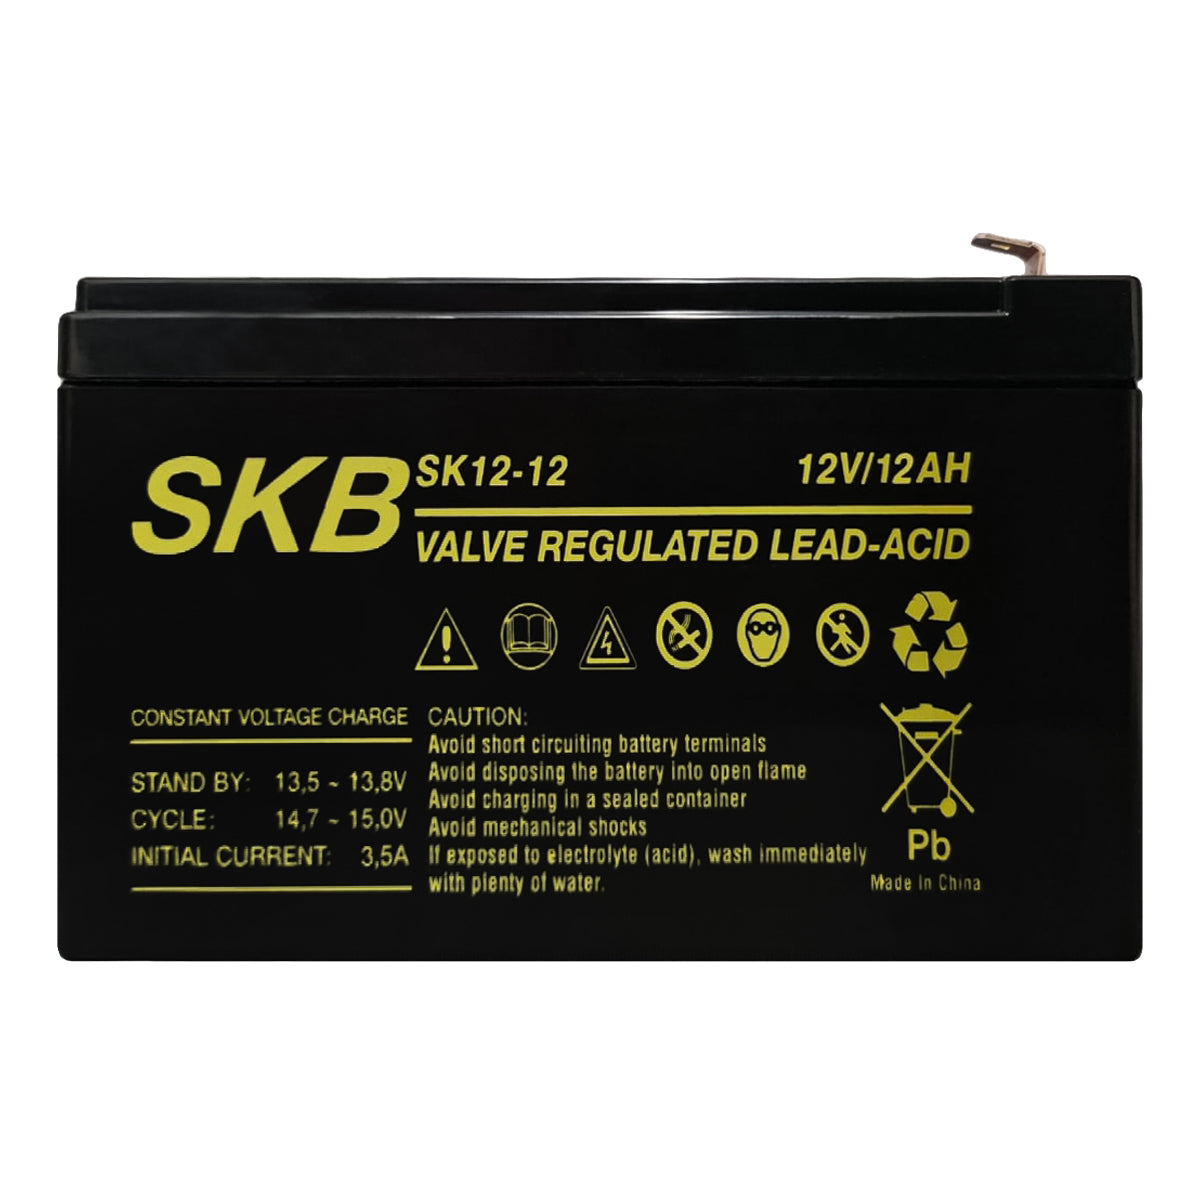 SKB SK12-12 lead acid battery, SK series 12V 12AH rechargeable battery, AGM flat plate technology regulated with valve